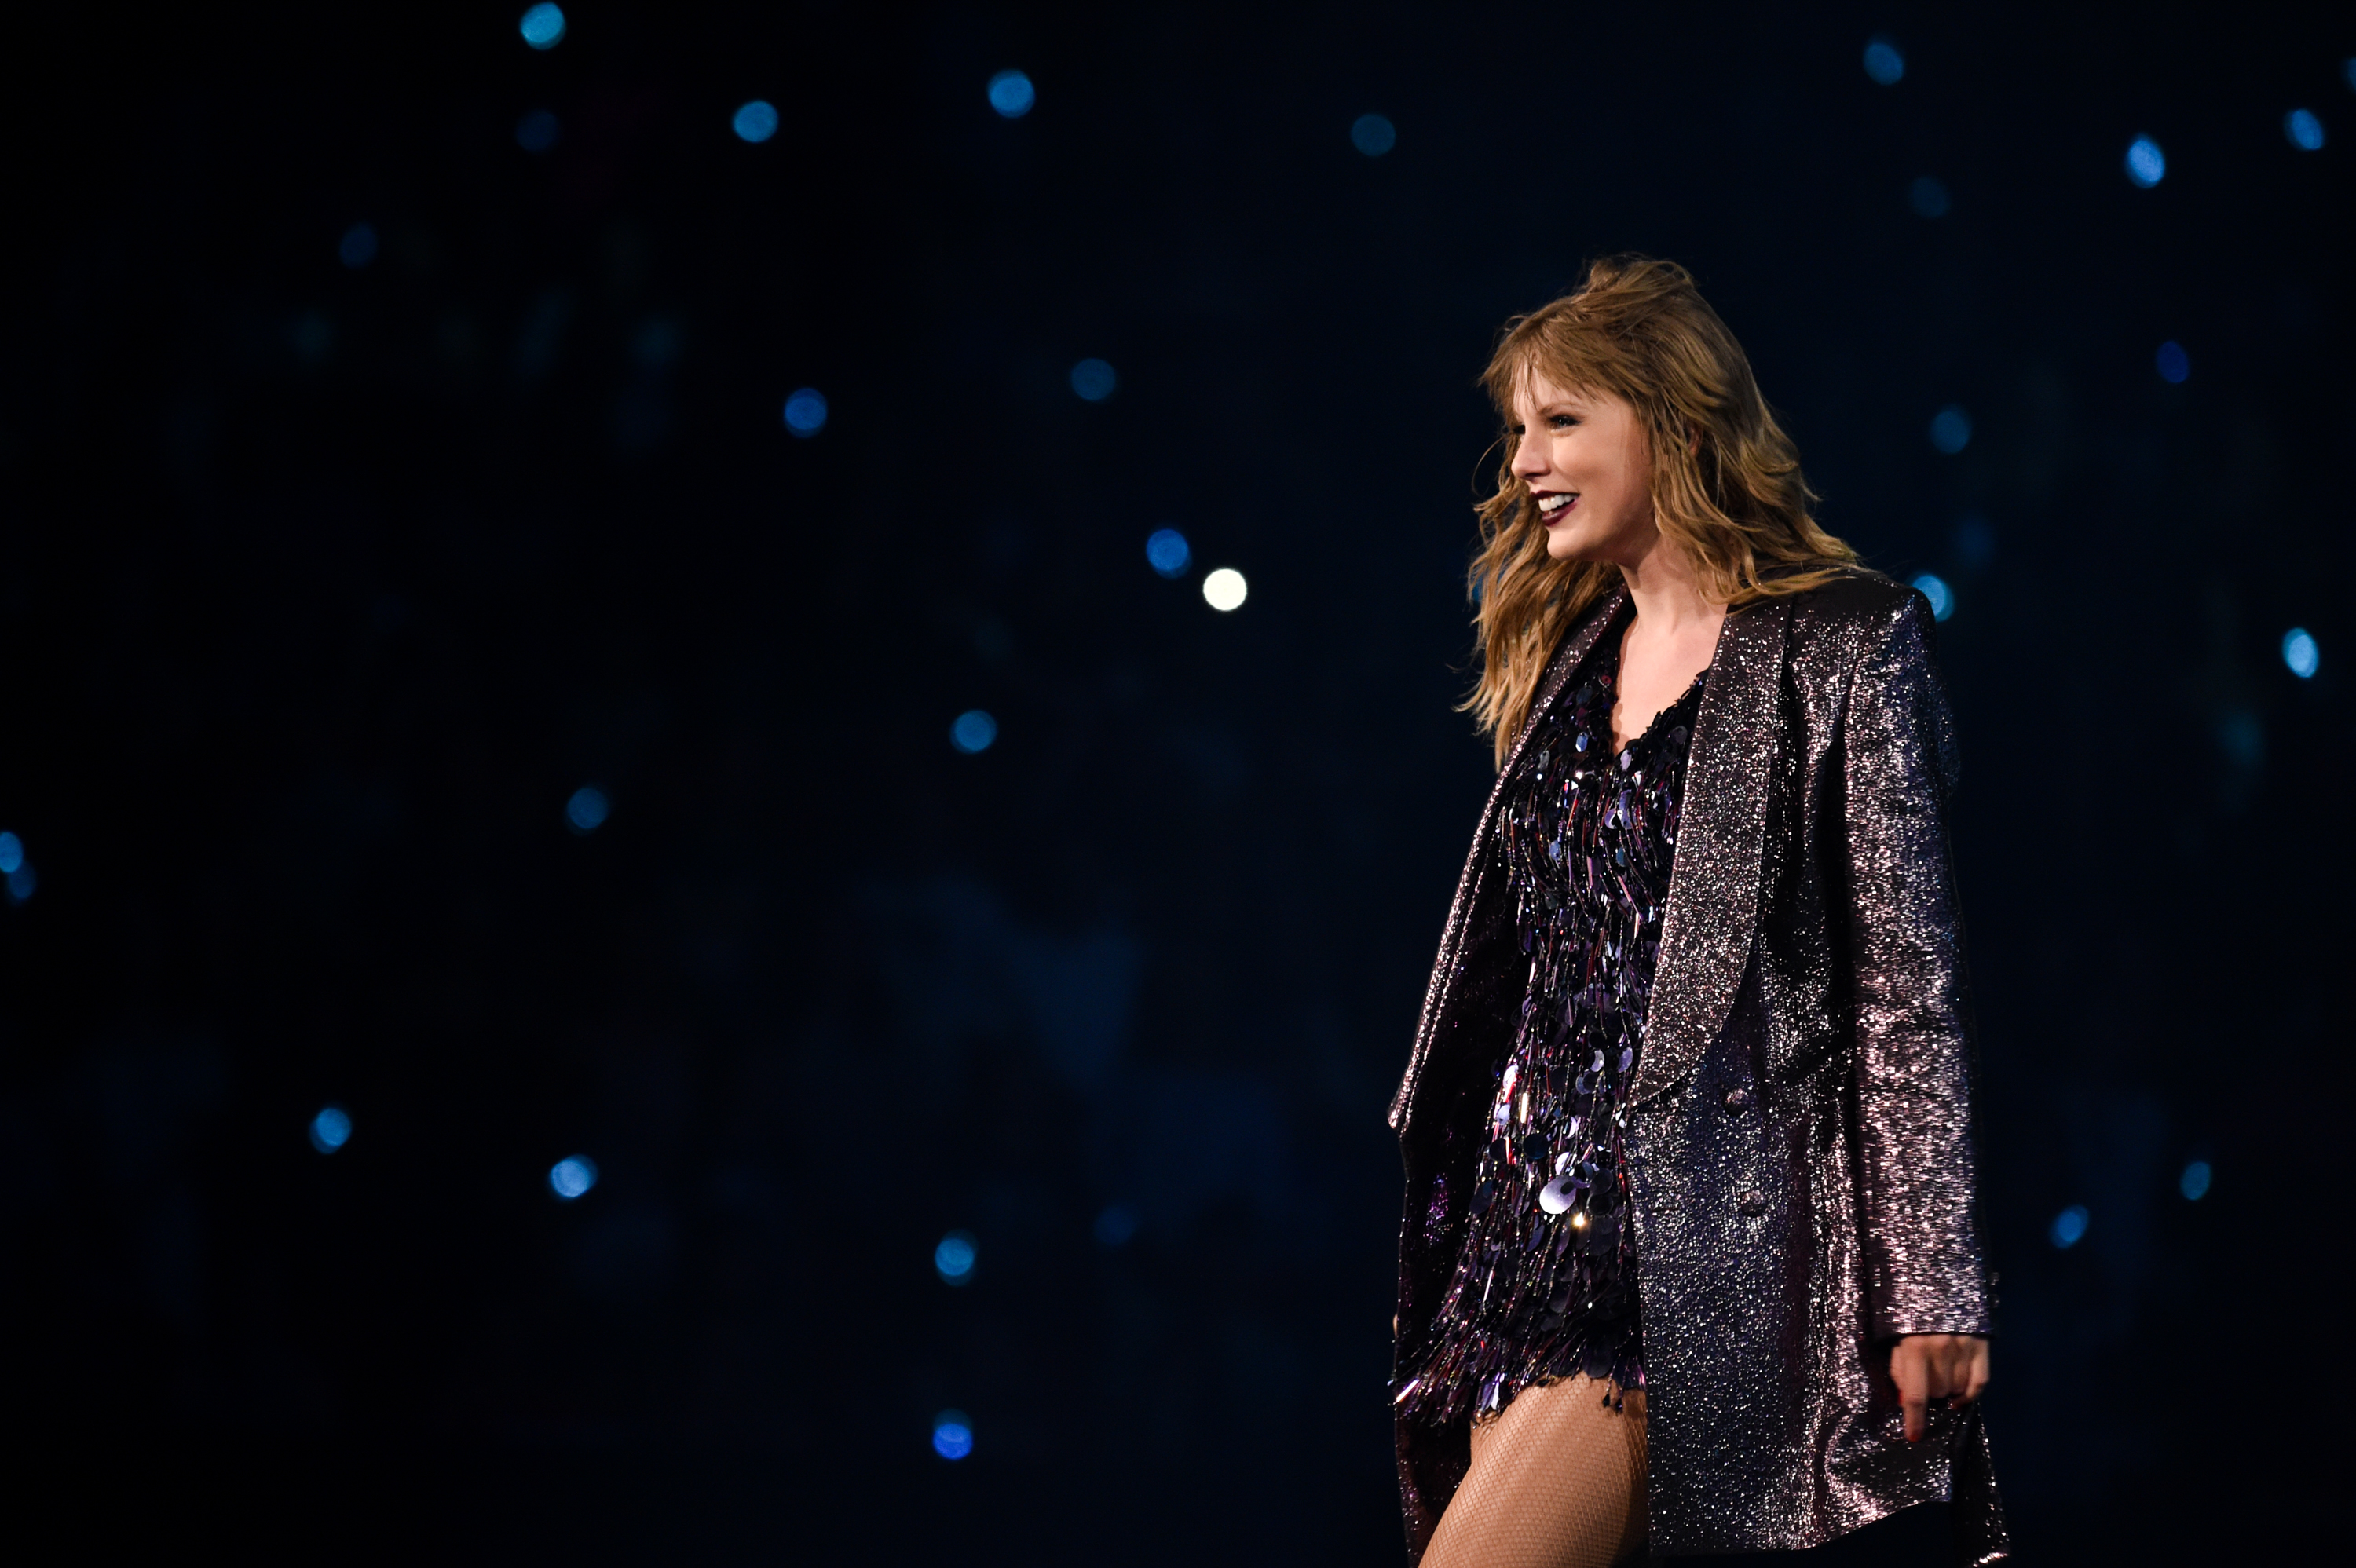 Taylor Swift performs onstage during the Taylor Swift reputation Stadium Tour at Mercedes-Benz Stadium on August 11, 2018 in Atlanta, Georgia.  (Photo by John Shearer/TAS18/Getty Images for TAS) (John Shearer/TAS18—Getty Images for TAS)